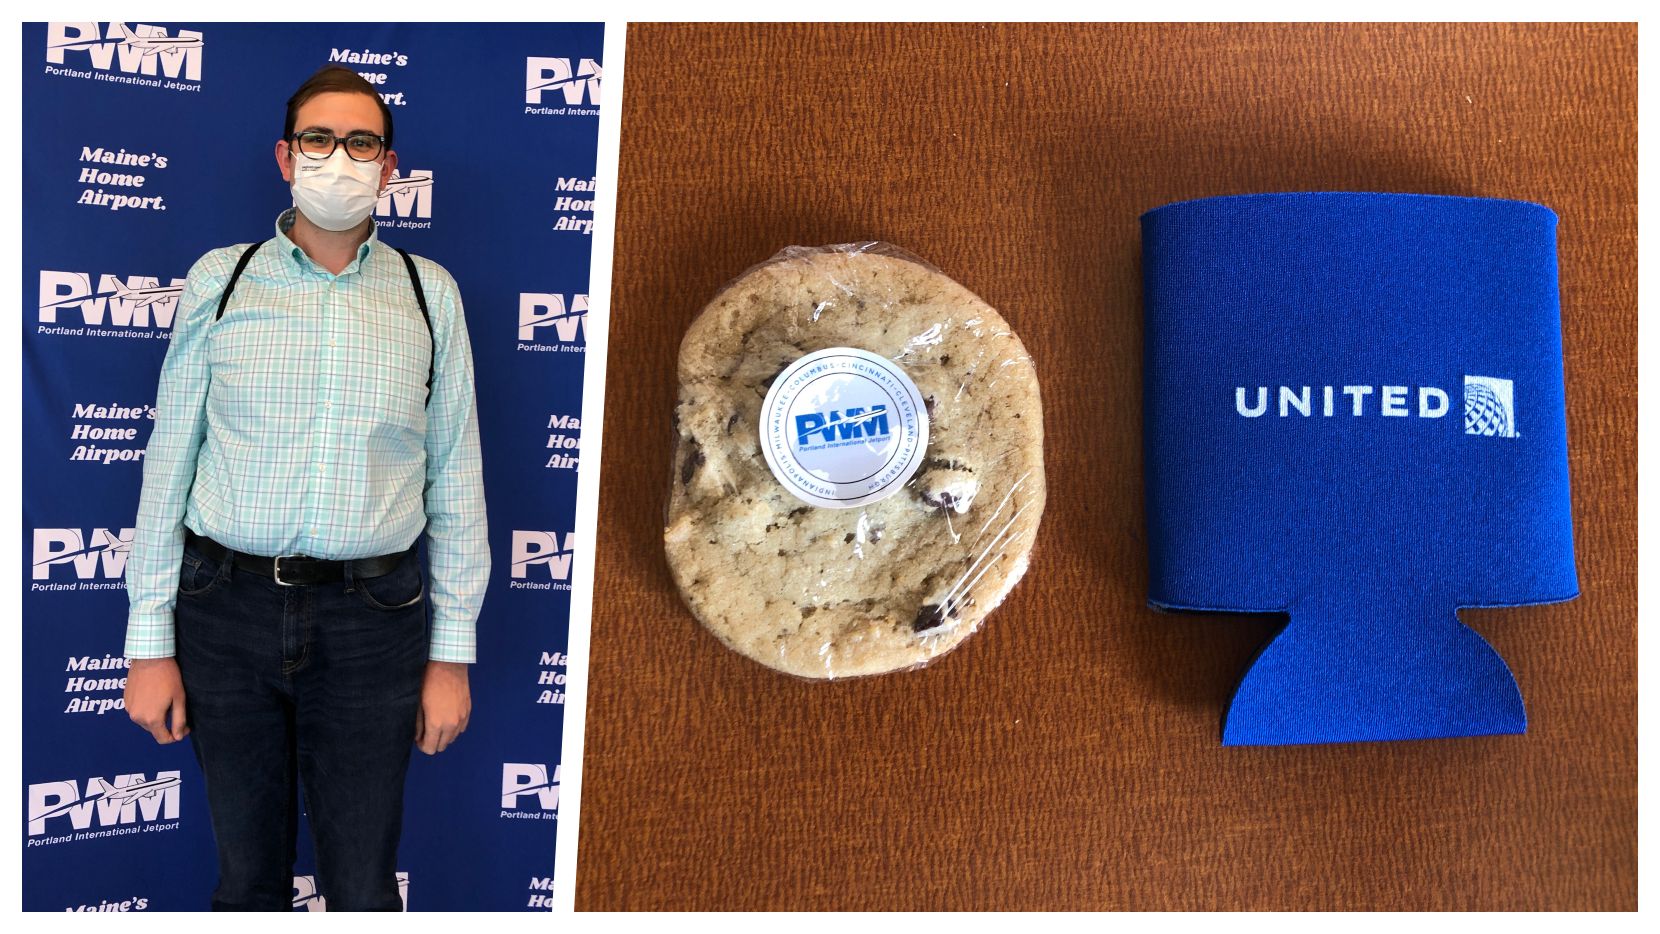 Paul standing in front of a wall patterned with the PMH airport logo, a cookie with a PWM sticker, and a United Airlines drink koozie.